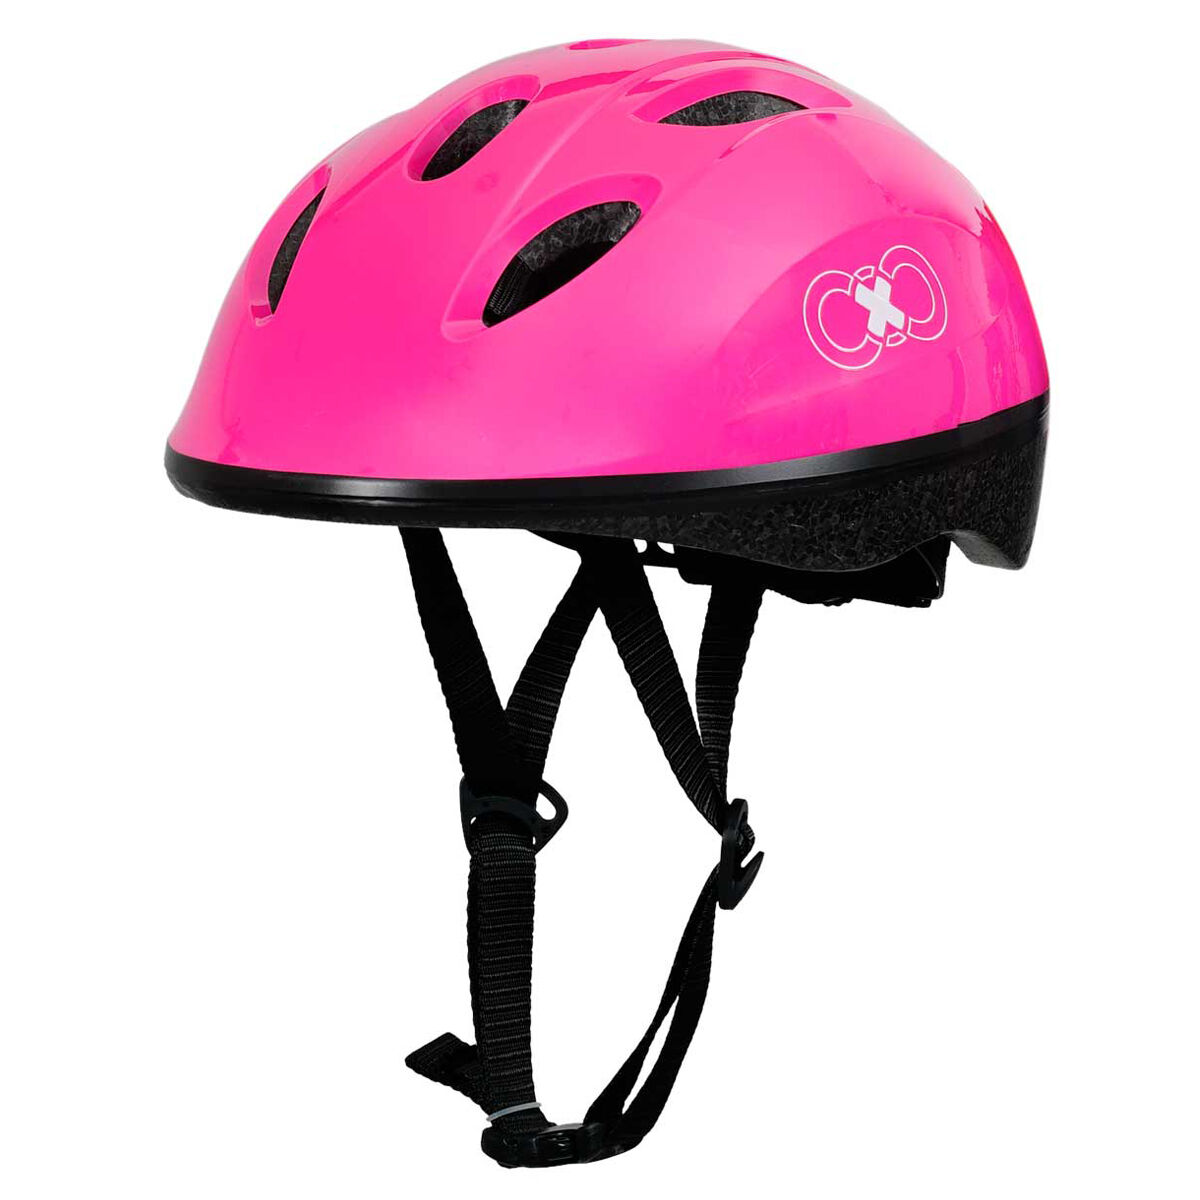 WORLD OF WARRIORS CHILDRENS BIKE BICYCLE SKATE SCOOTER SAFETY HELMET 52-56CM NEW 